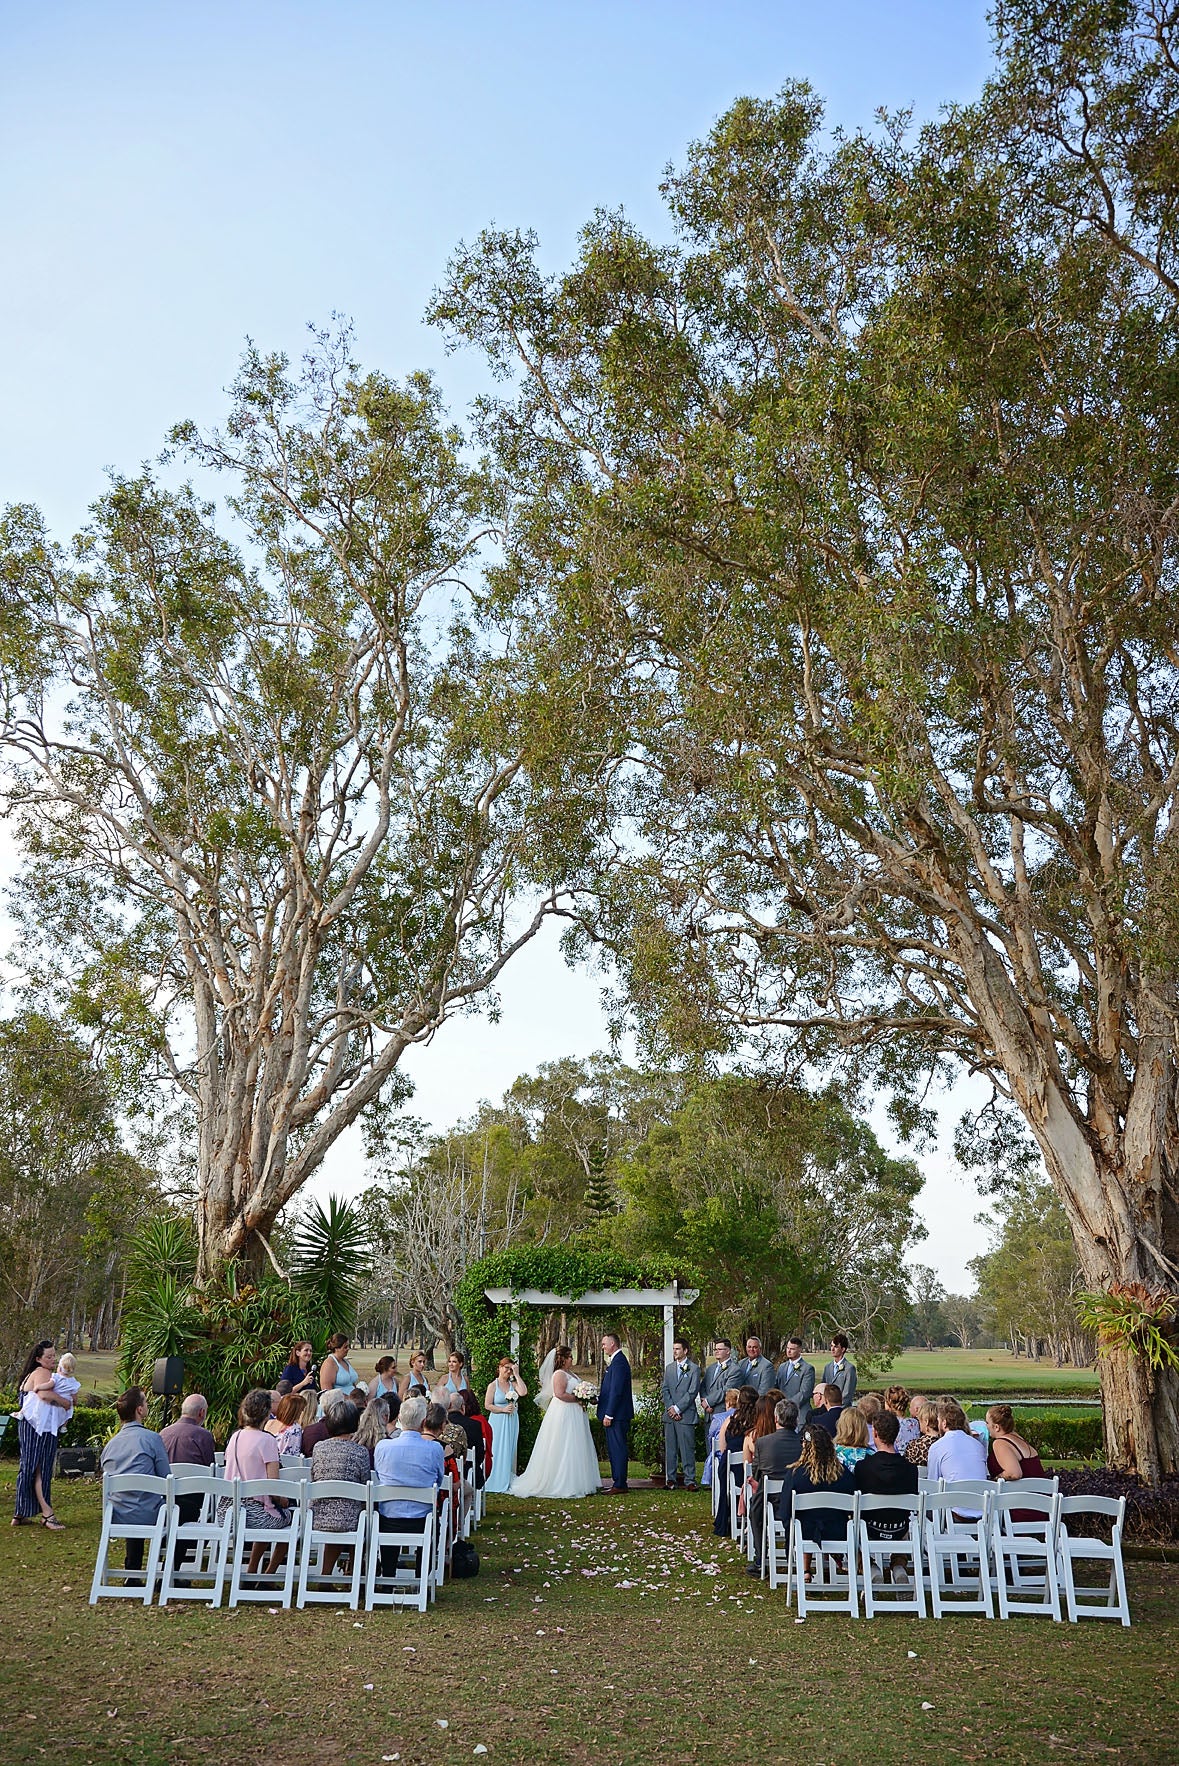 Golf Club Garden Ceremony - Any day of the week